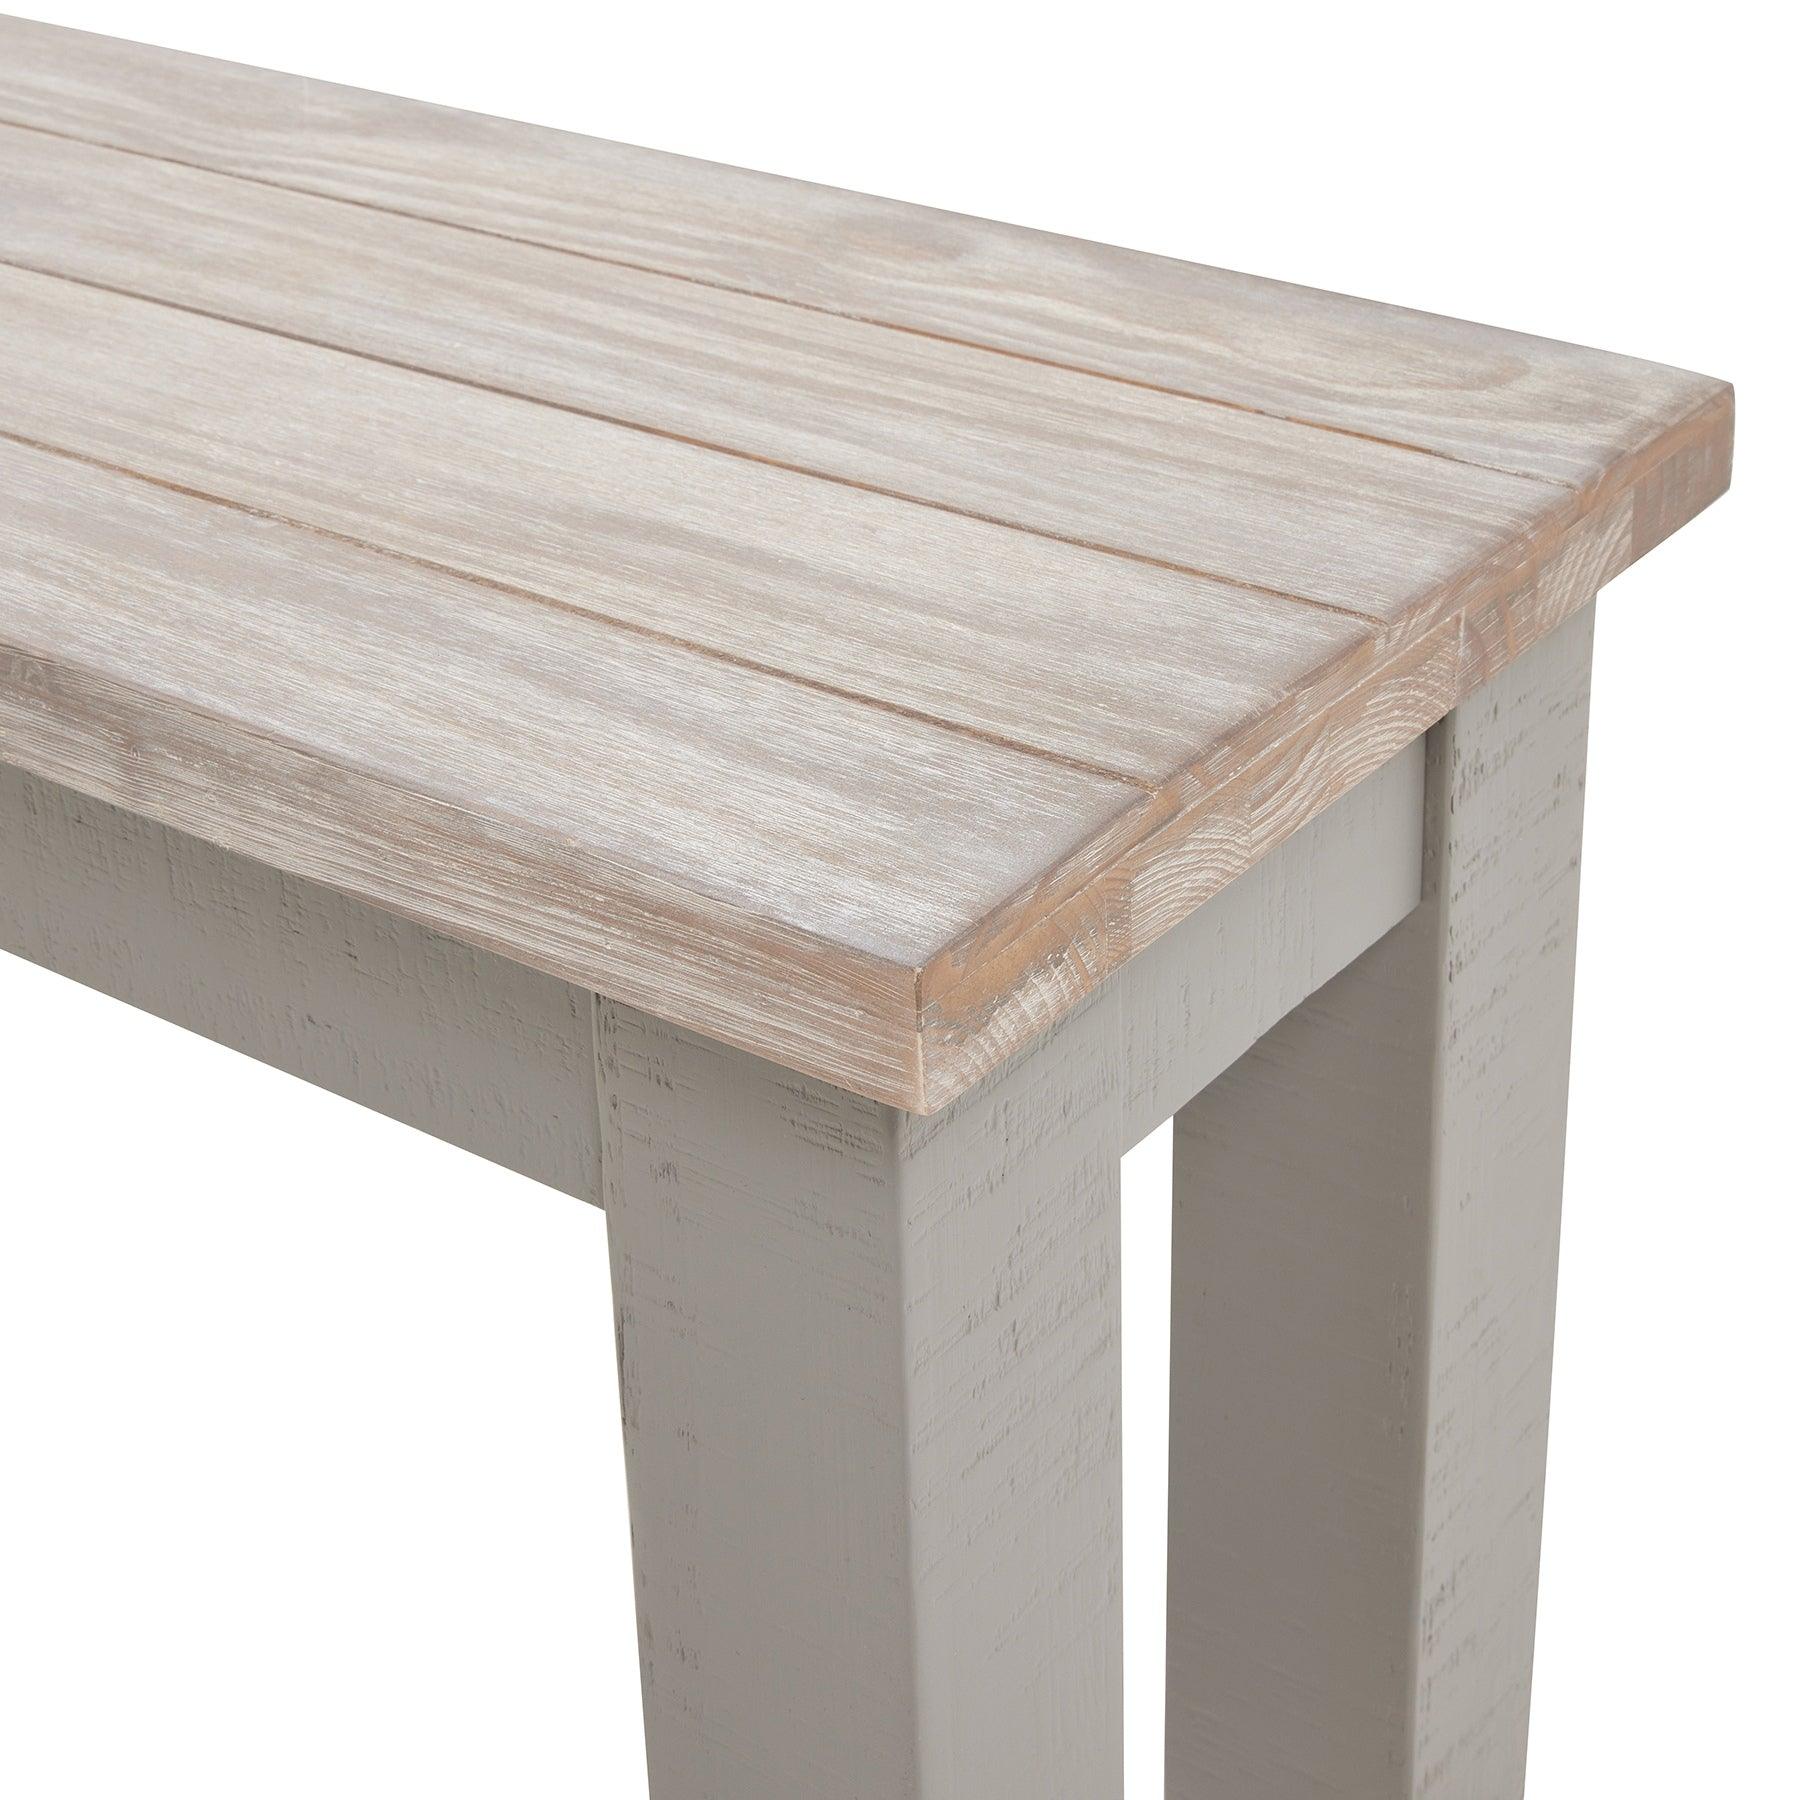 The Oxley Collection Dining Bench - Vookoo Lifestyle